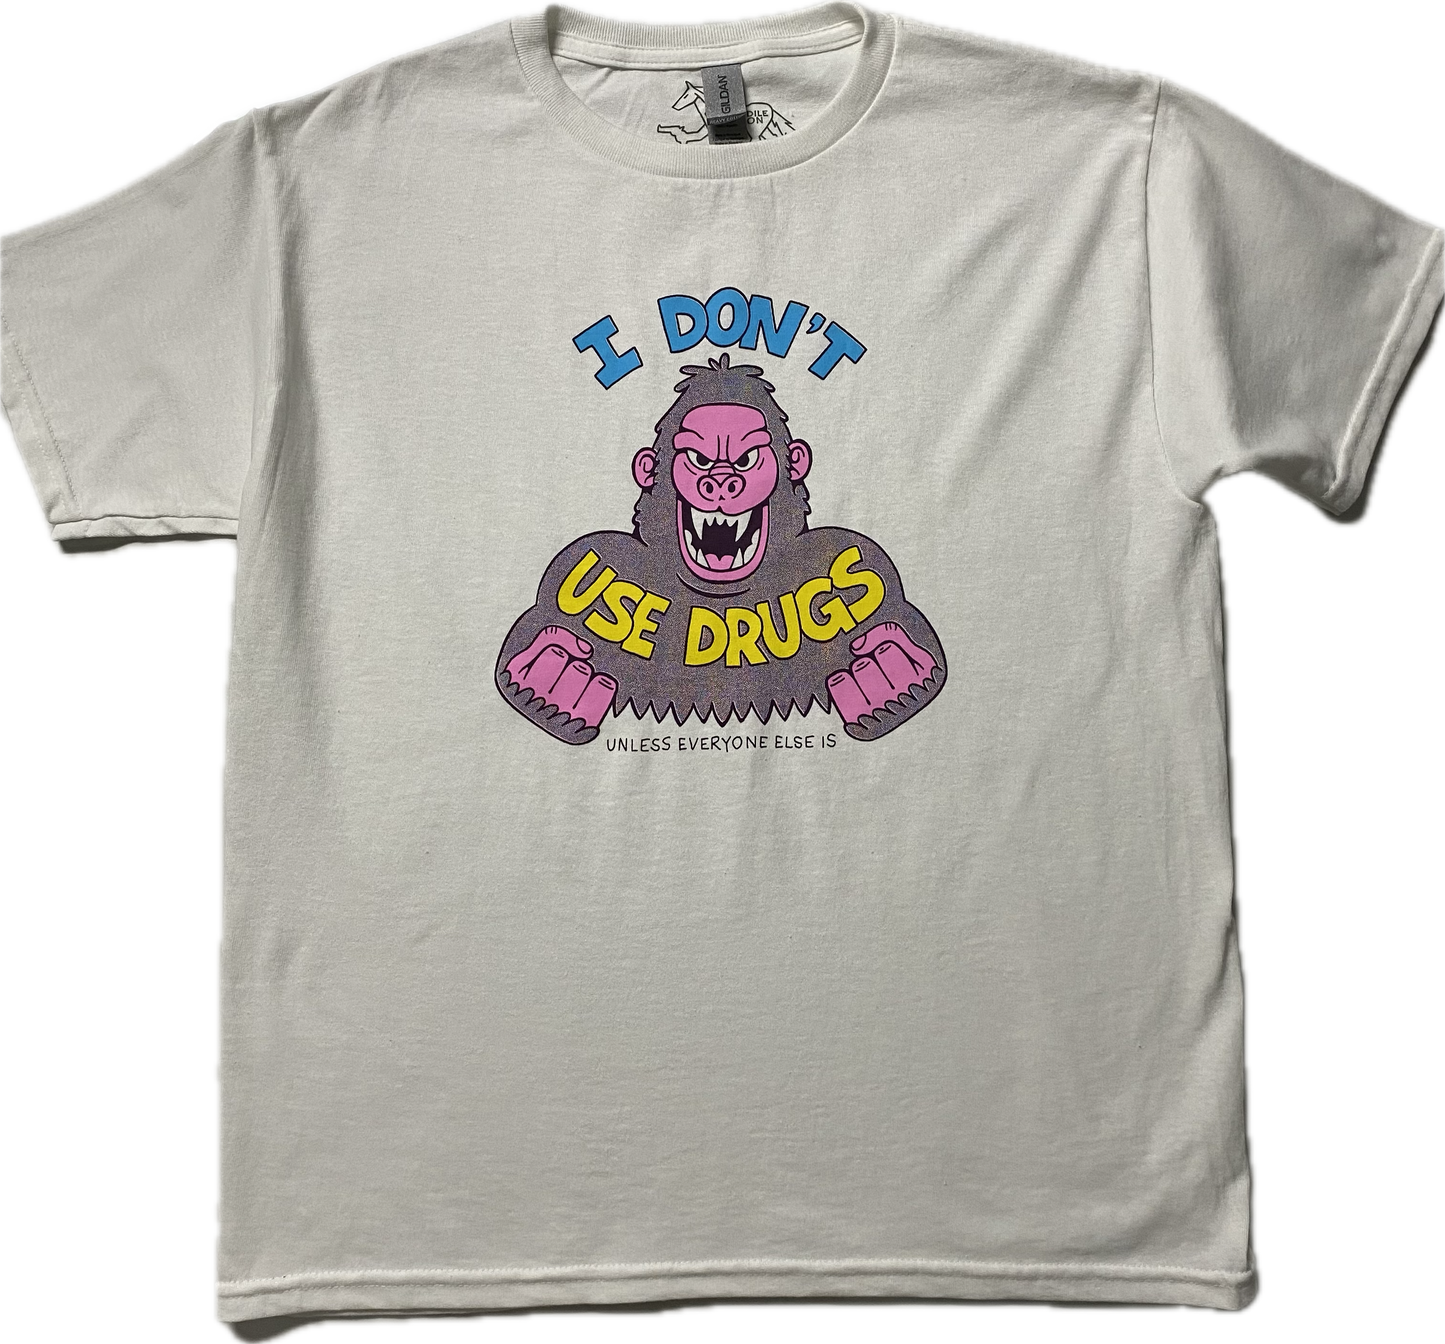 A white short sleeve t-shirt with an angry purple cartoon gorilla with clinched fists and fangs.. It reads I Don't in blue font then Use Drugs in gold font. In tiny font at the bottom it reads Unless Everyone Else Is.